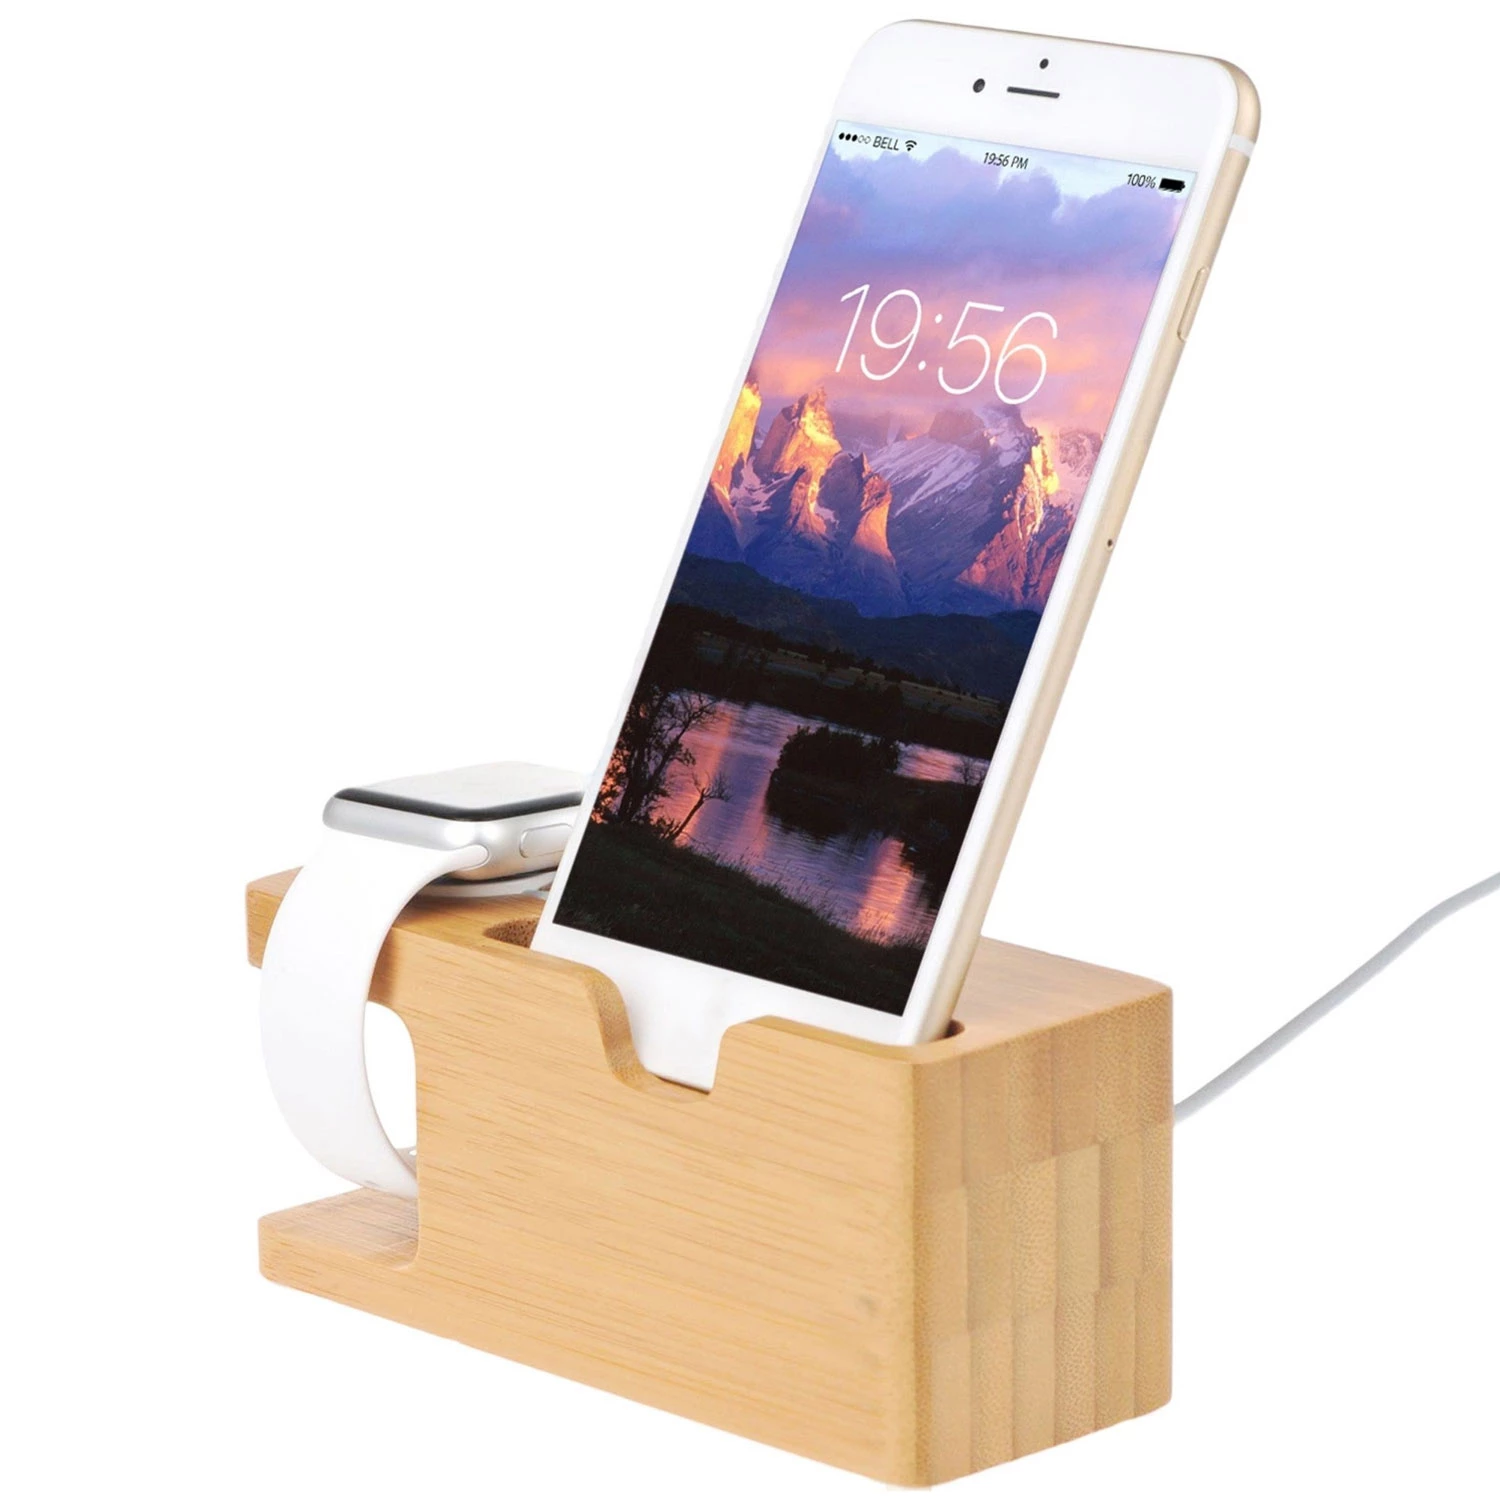 Bamboo Wood Charging Stand For Apple Watch 42mm 38mm Universal Phone Holder Dock Station iPhone X Xs